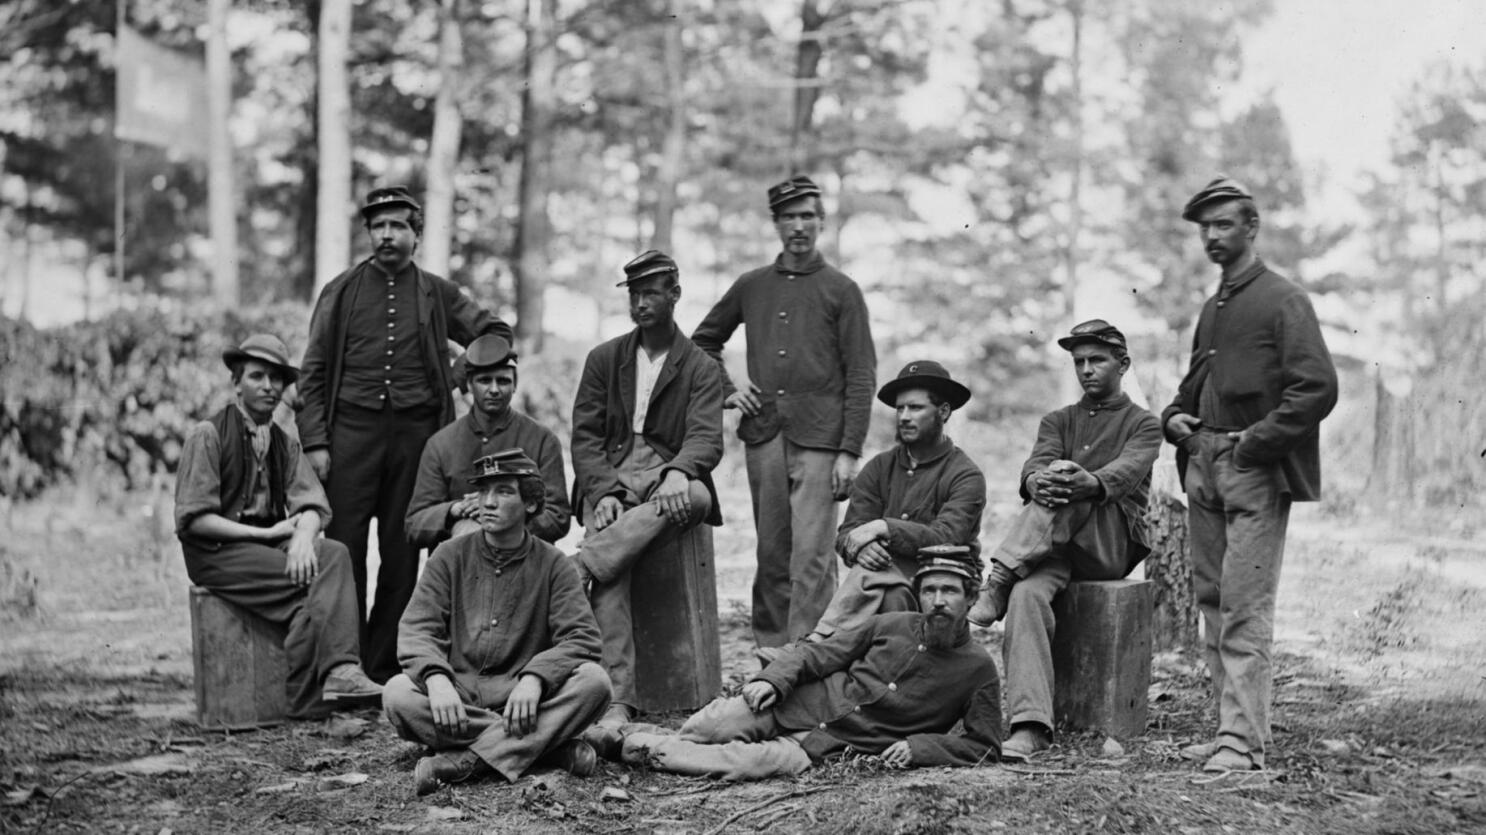 Post Traumatic Stress Disorder and the American Civil War